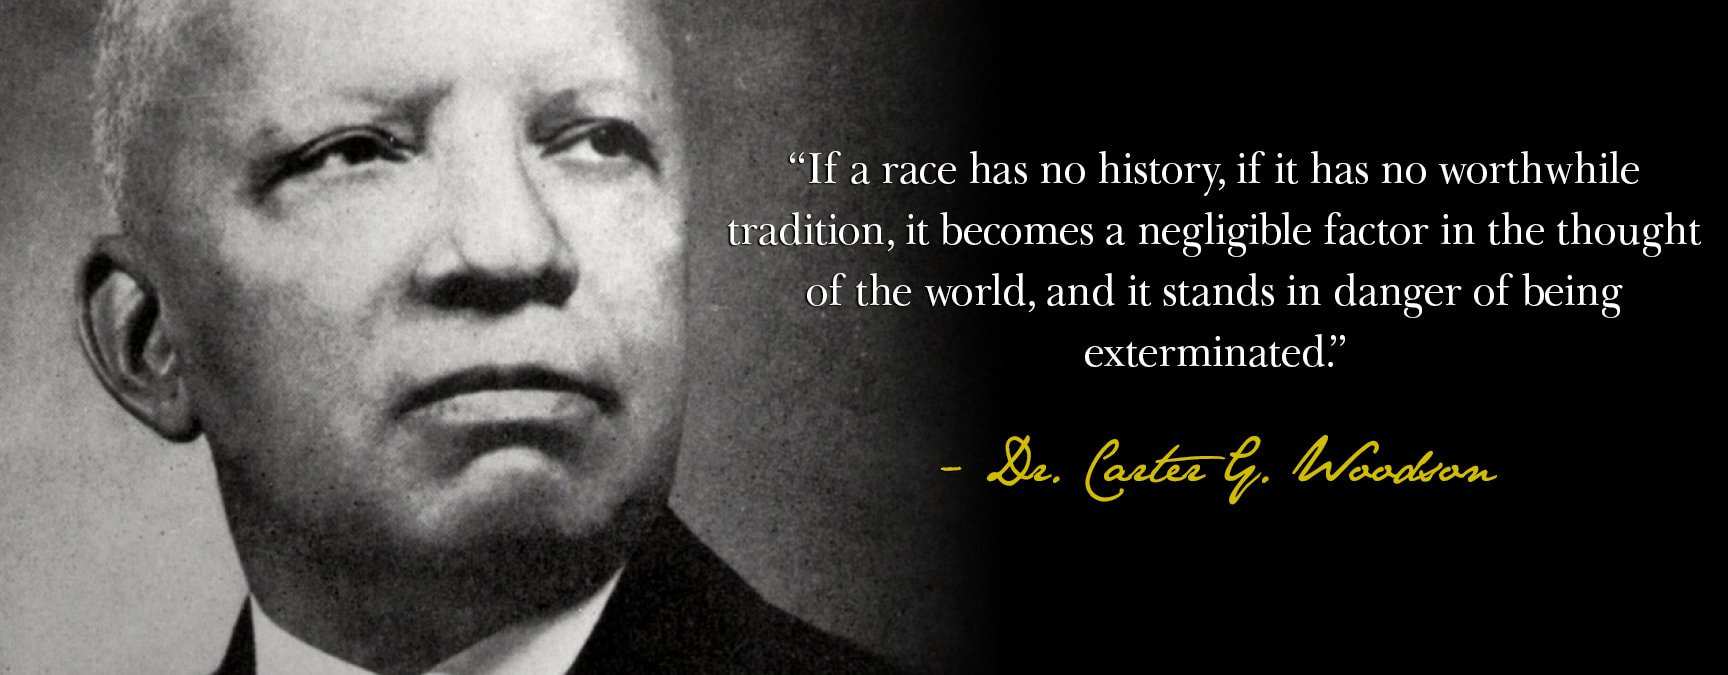 Photo: Dr. Carter G. Woodson with quote, “Those who have no record of what their forebears have accomplished lose the inspiration which comes from the teaching of biography and history.”